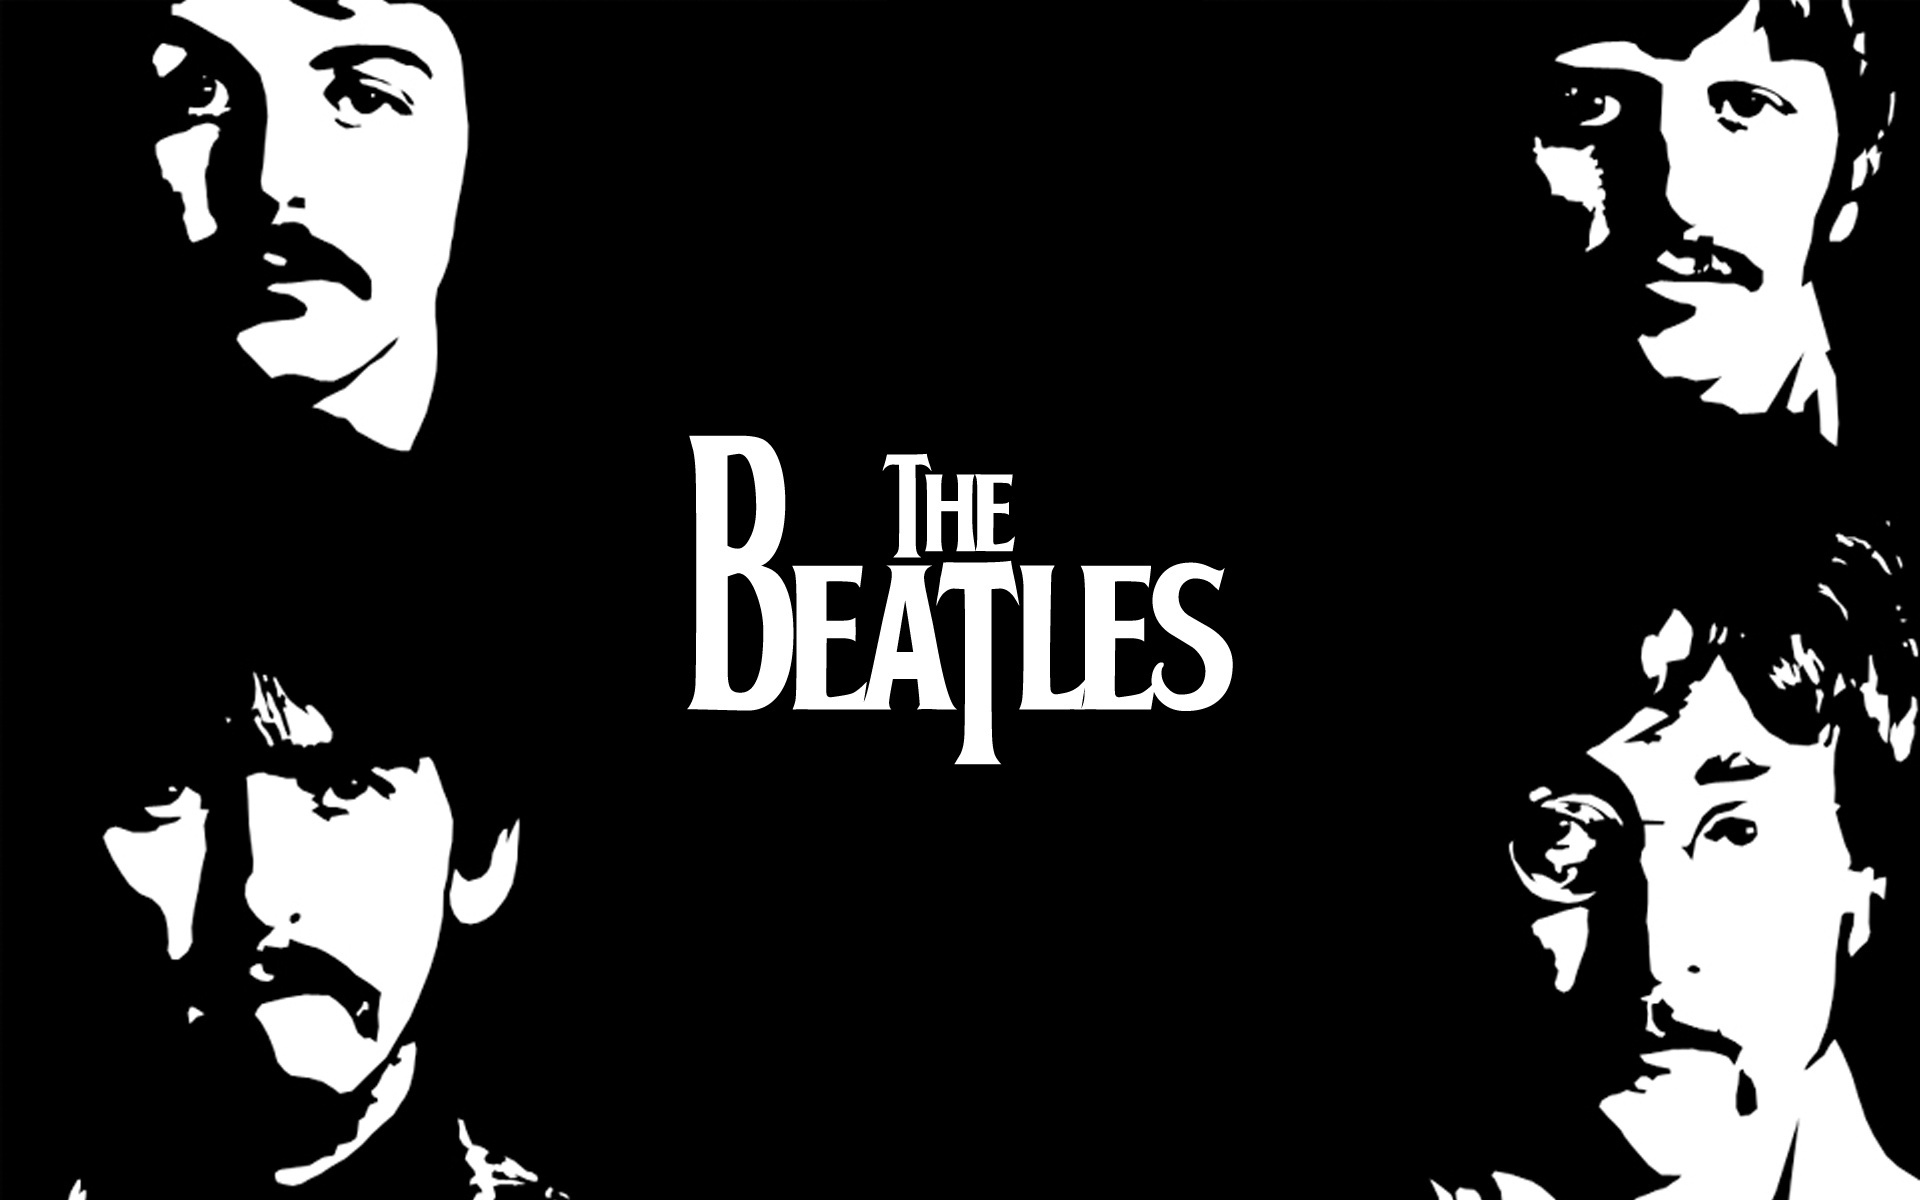 Download image The Beatles Black Wallpaper Hd For Free Backgrounds 549